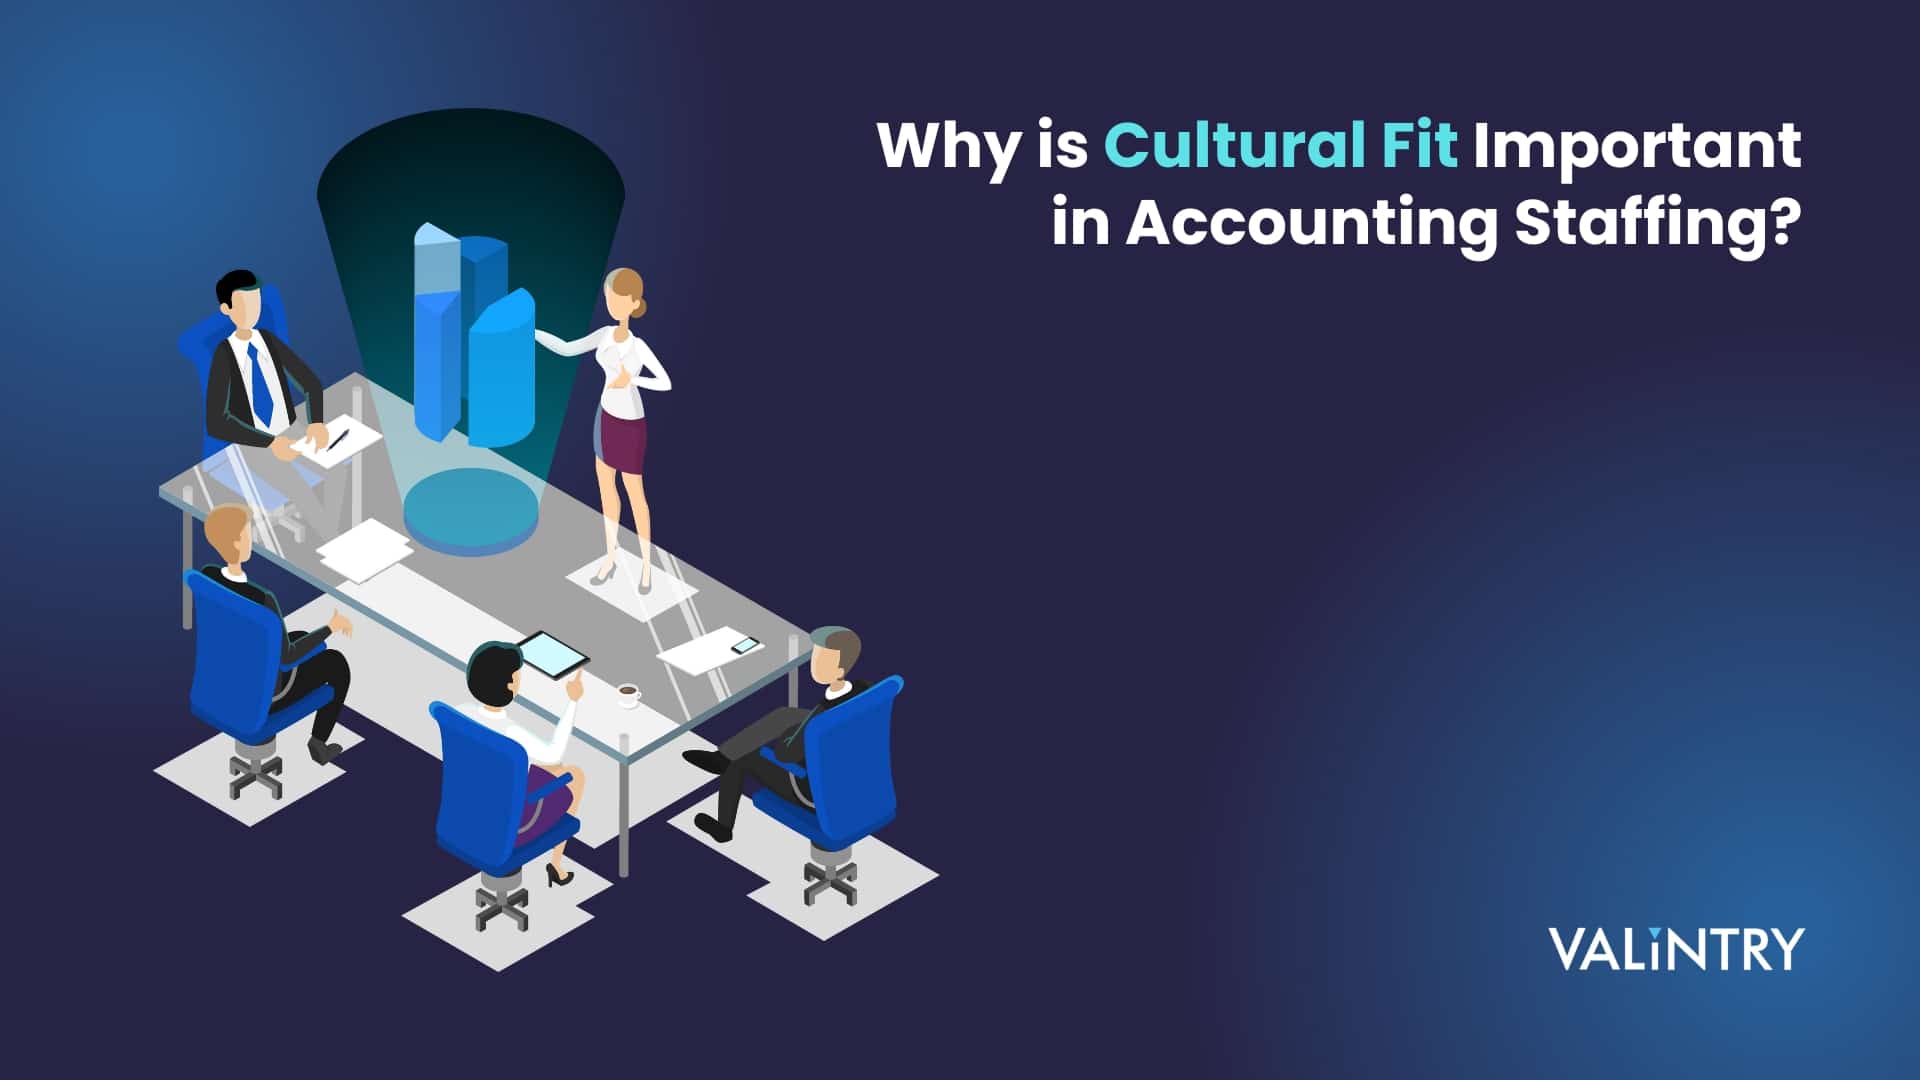 Why is Cultural Fit Important in Accounting Staffing?